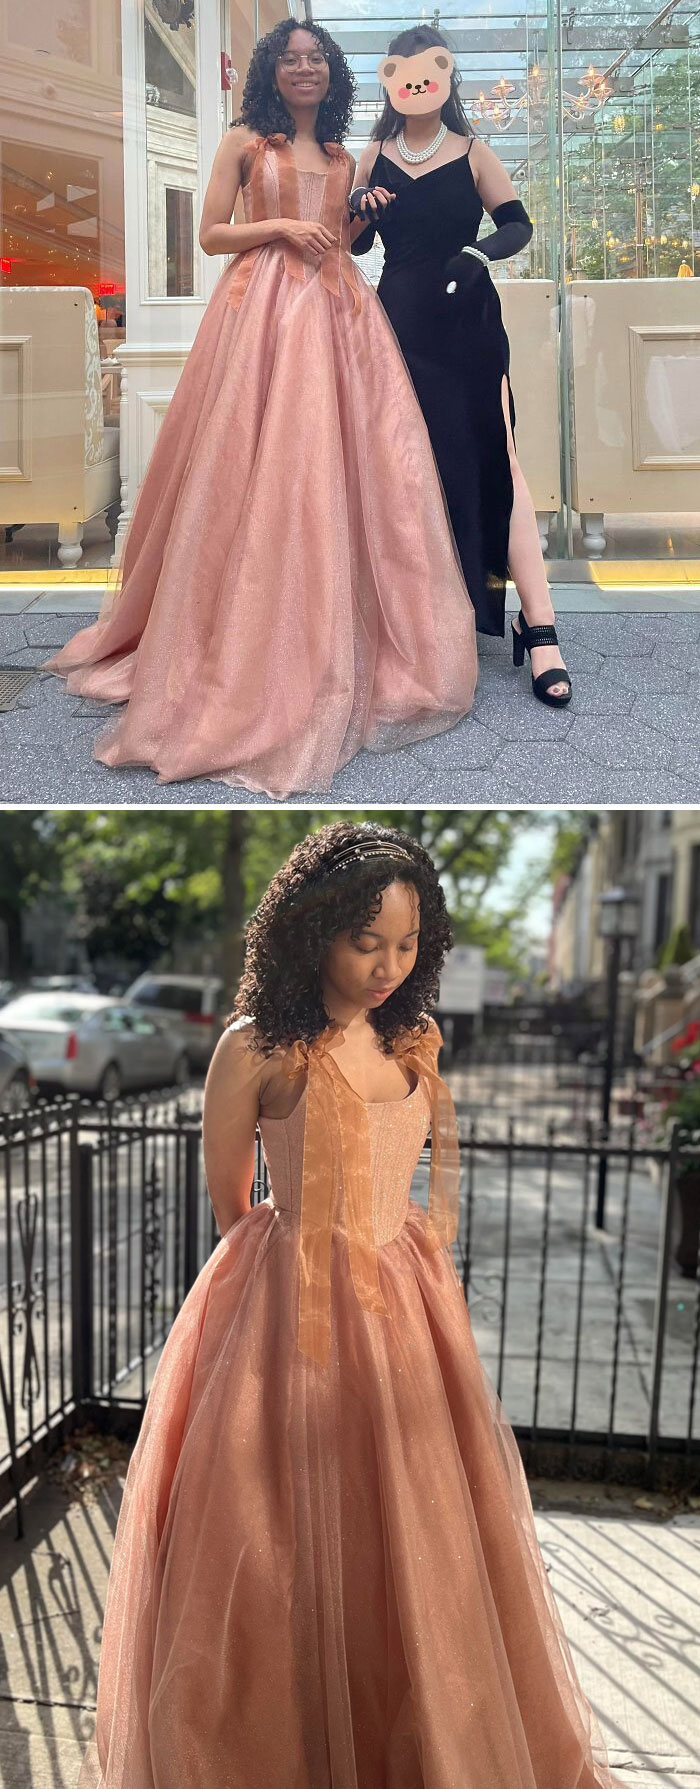 I Made My And My Friend's Prom Dresses